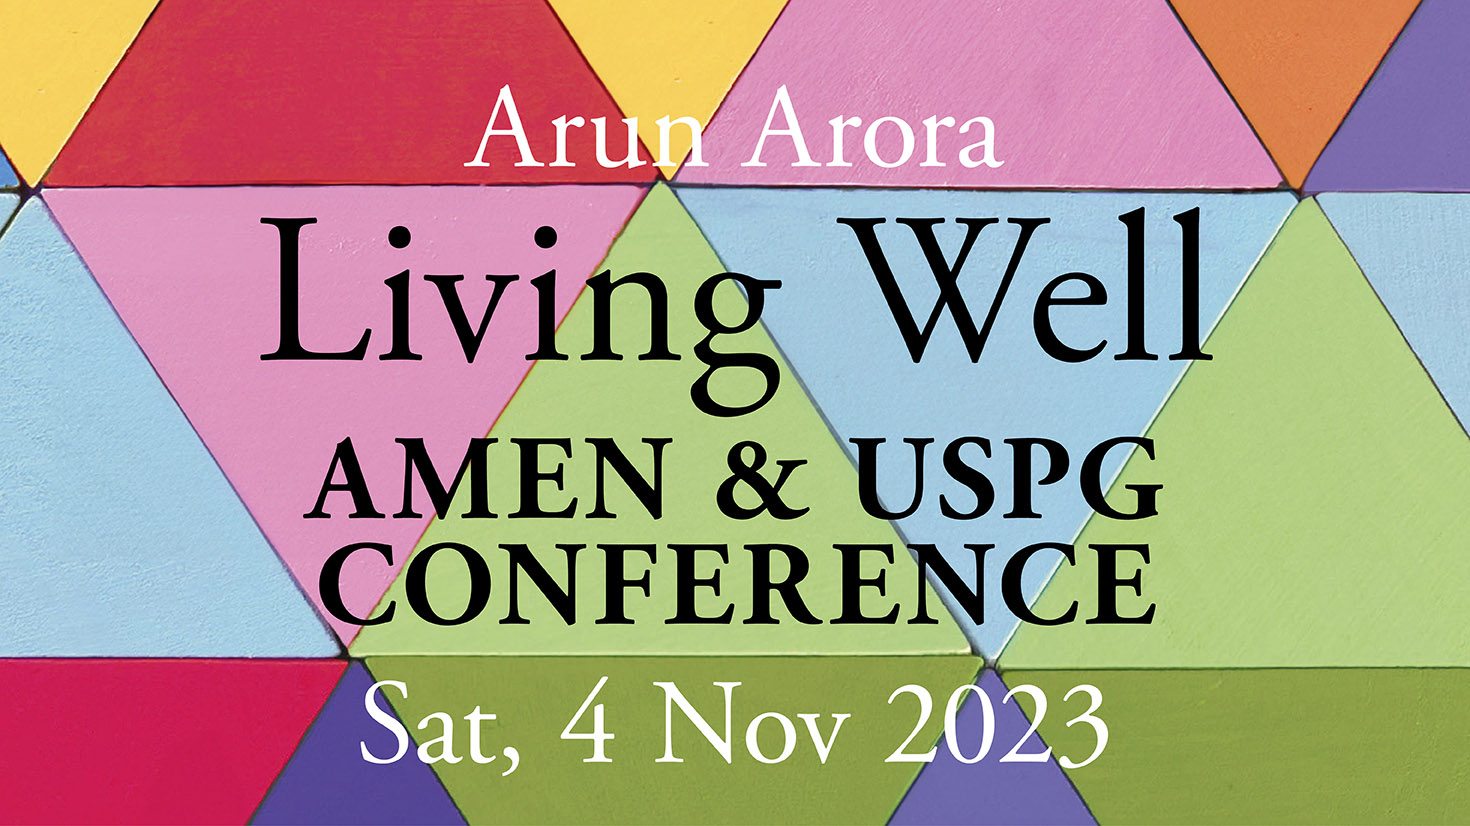 Arun Arora speaking at Living Well Conference on the 4th November